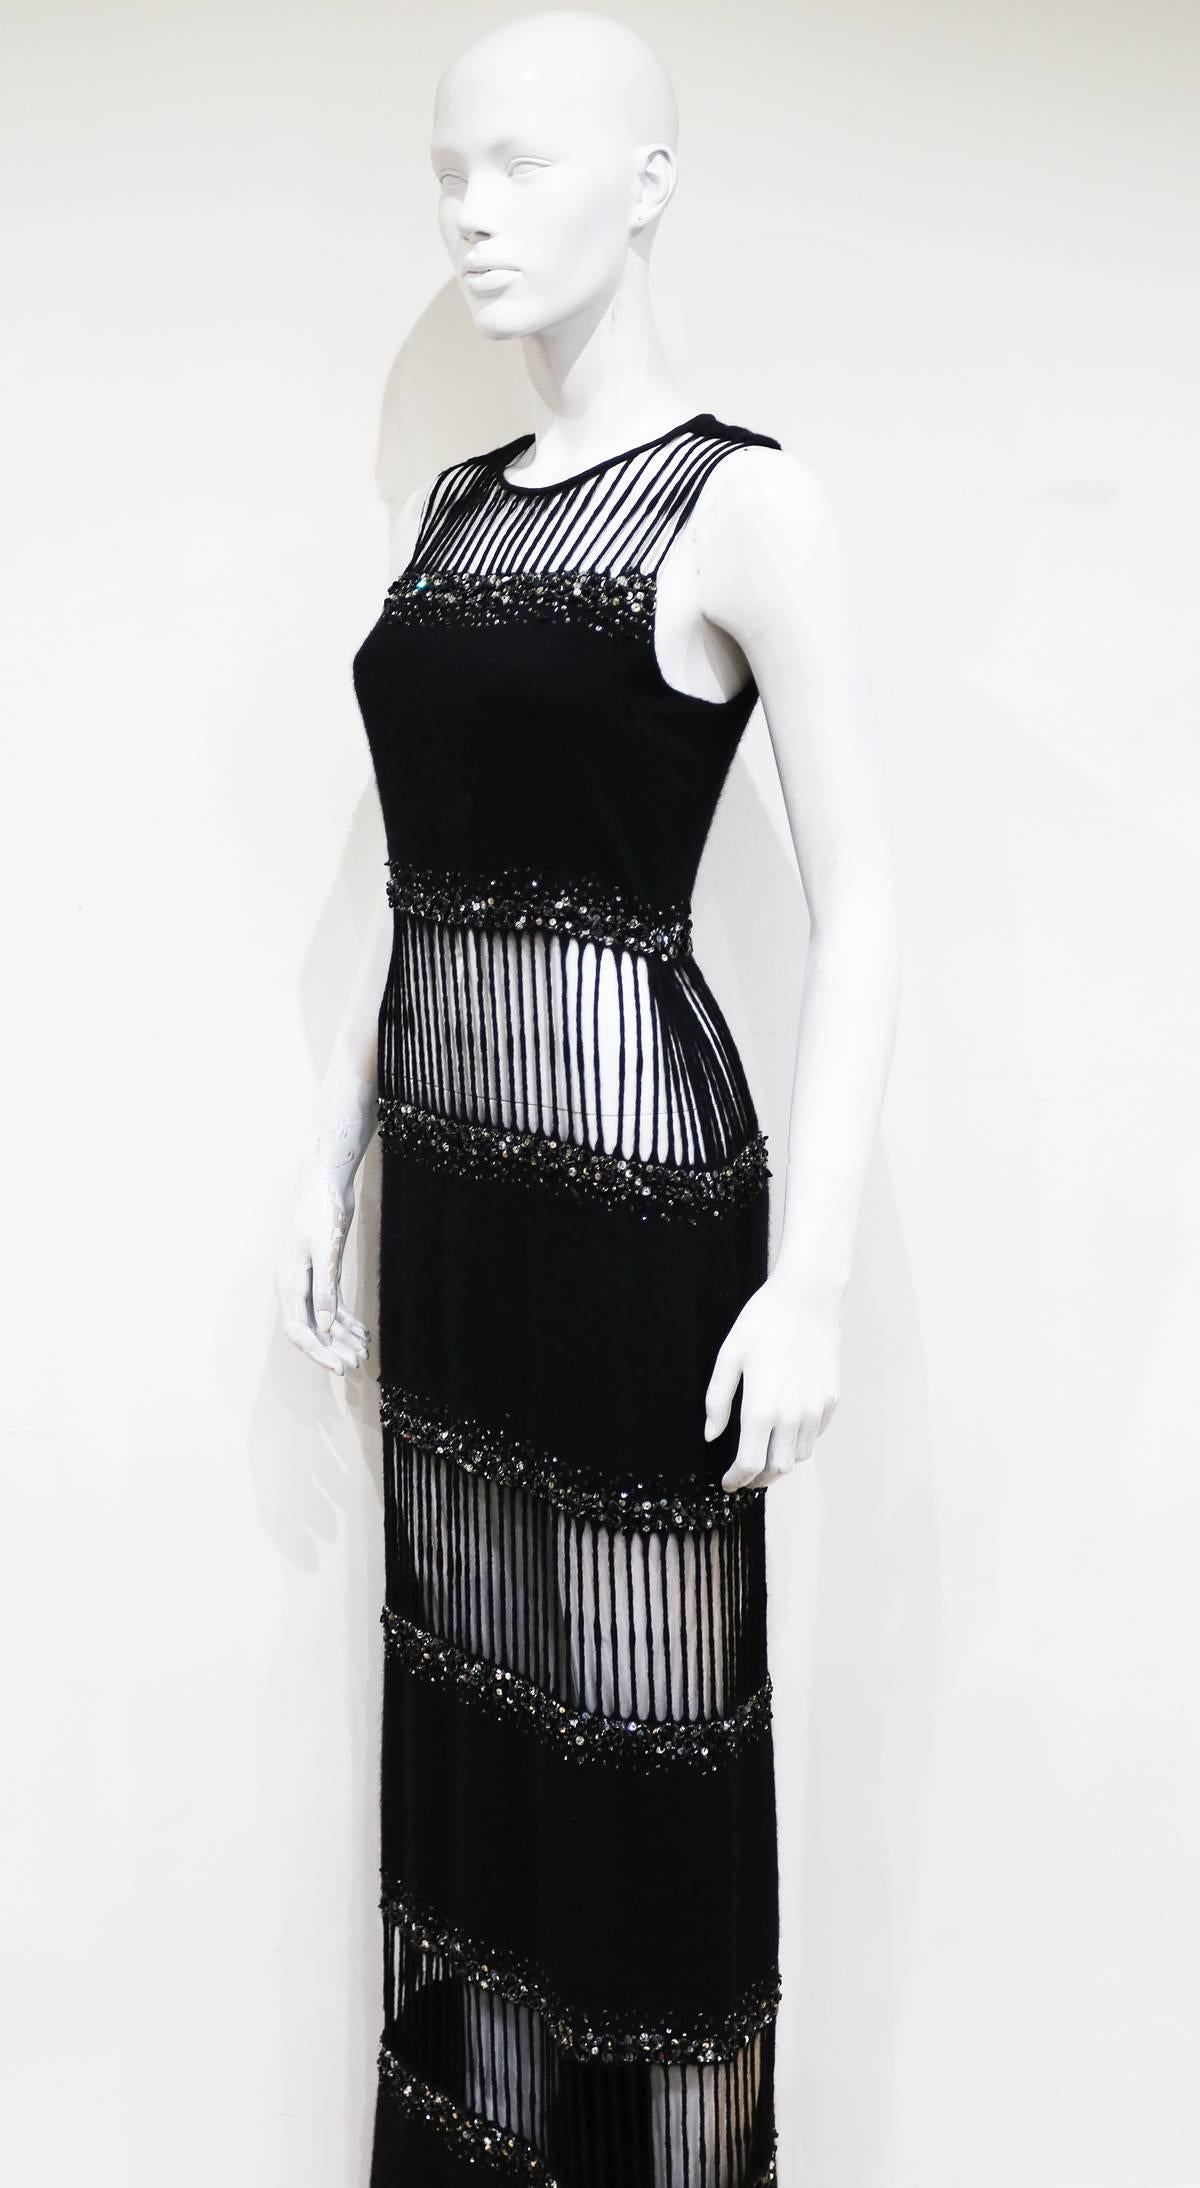 Black Hardy Amies Haute Couture embellished cut out evening dress, c. 1960s